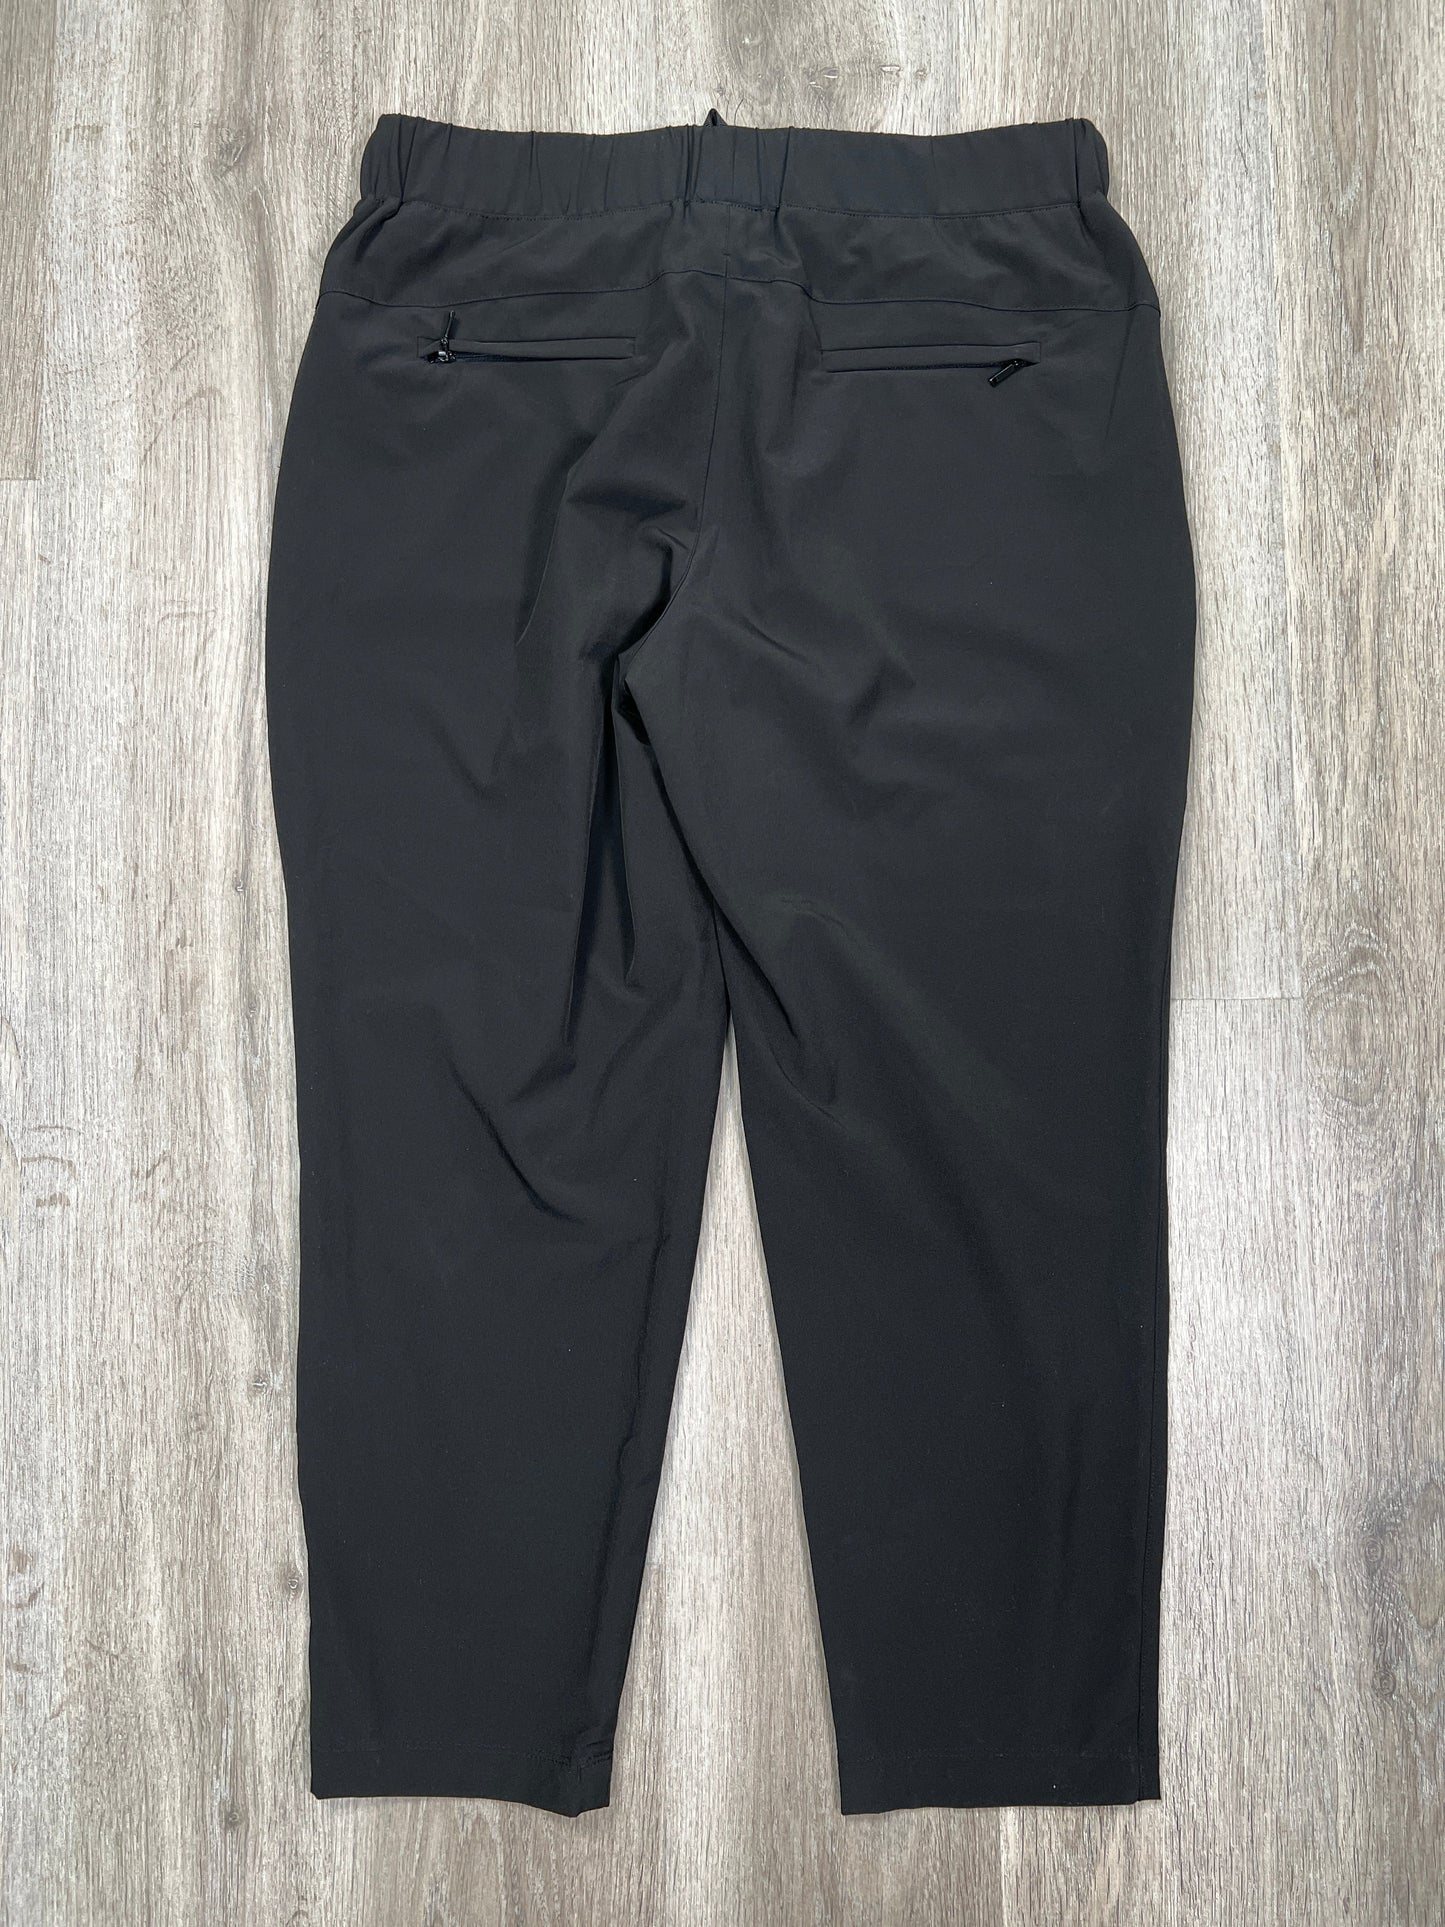 Athletic Pants By Zenergy By Chicos  Size: M